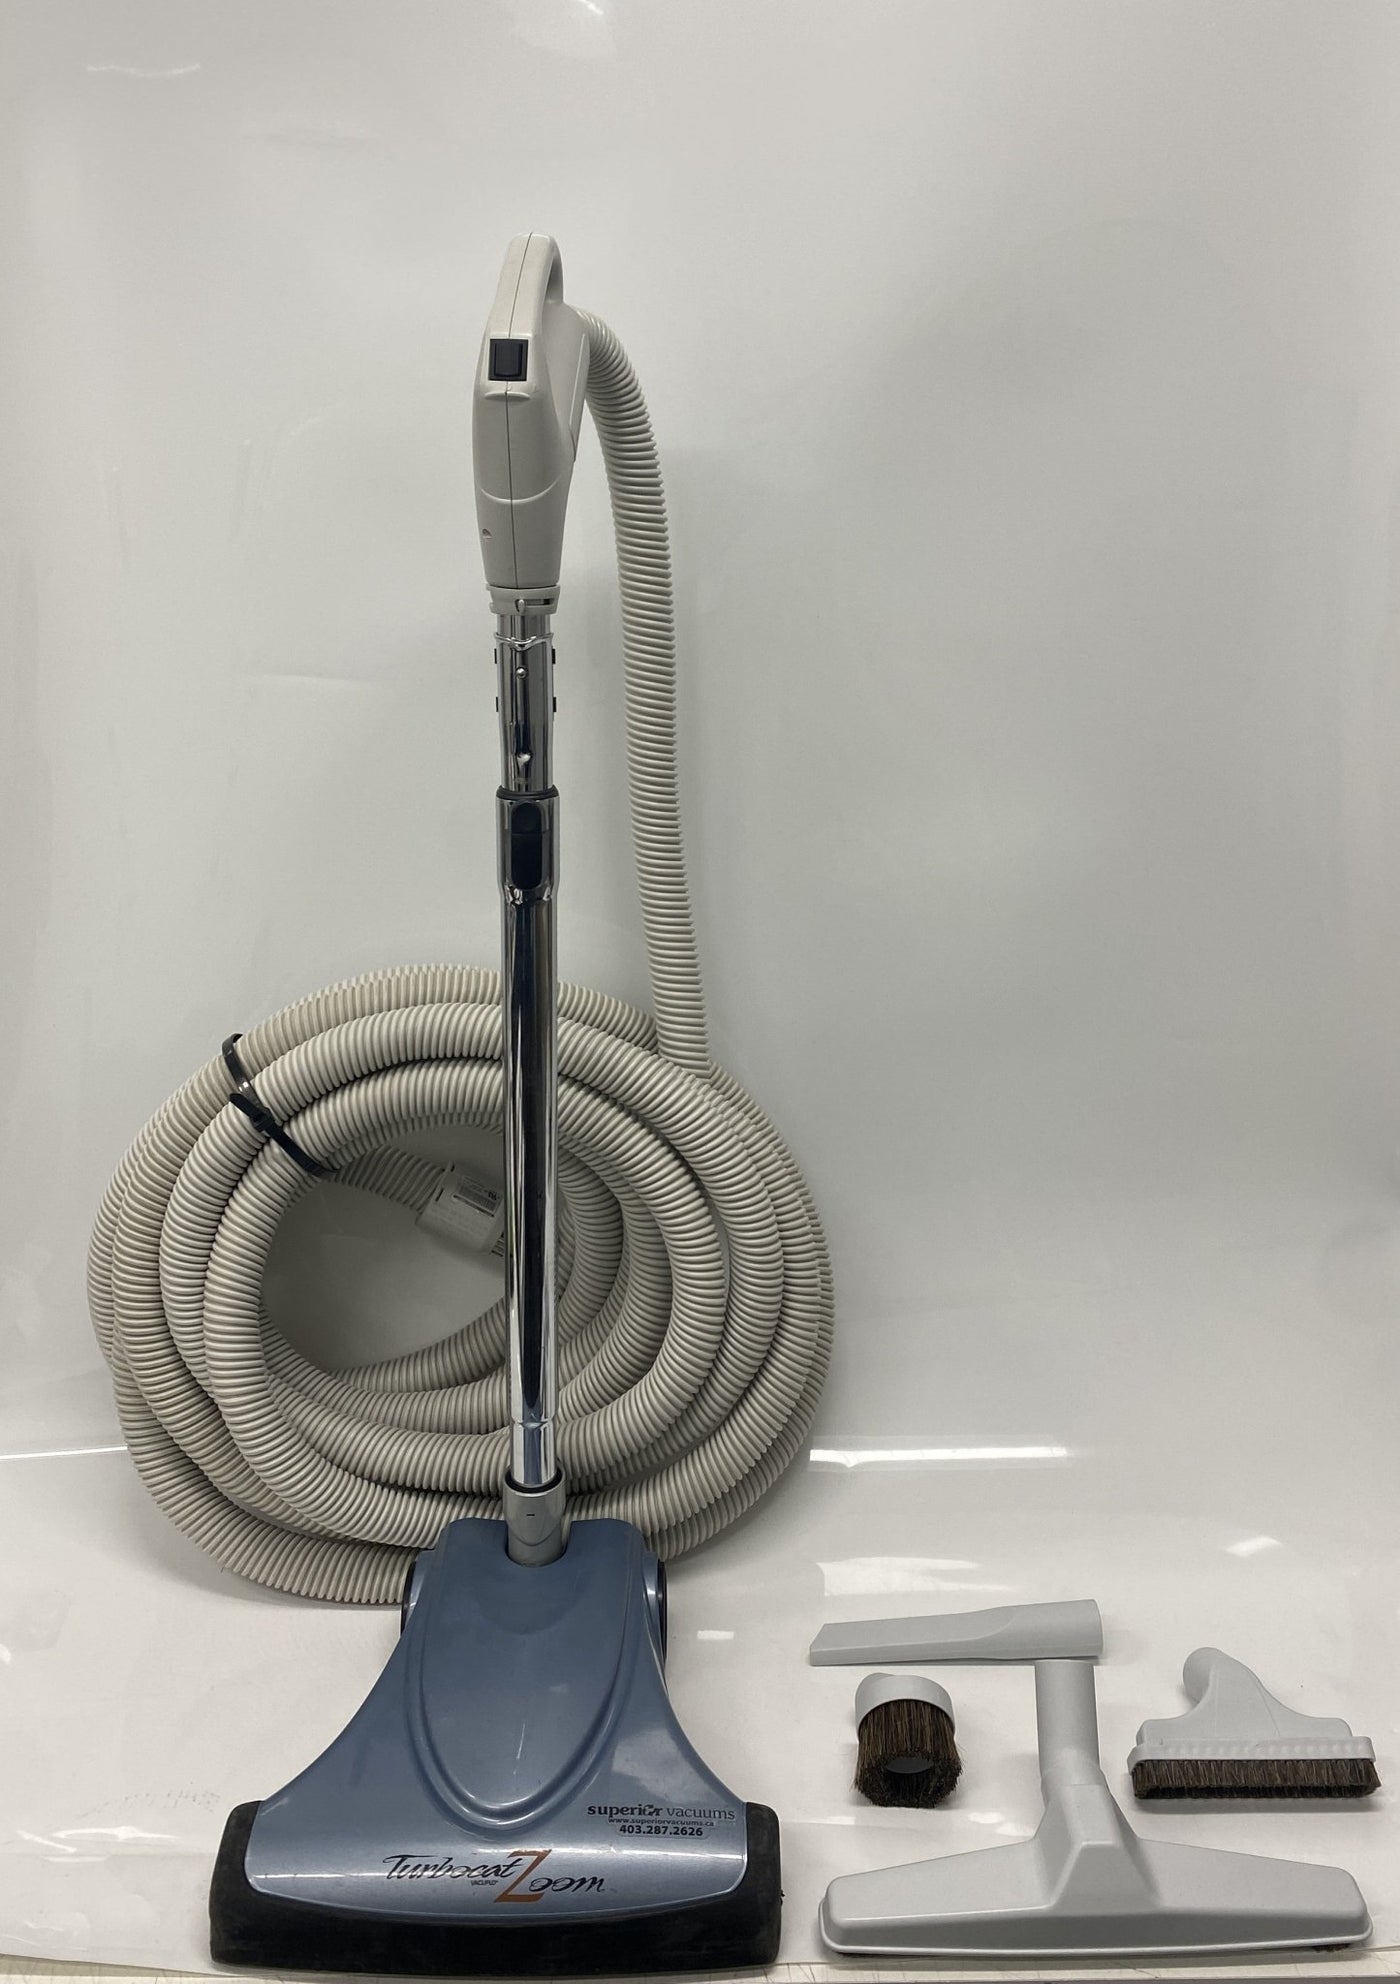 Beam 520 Central Vacuum System with Brand New Kit